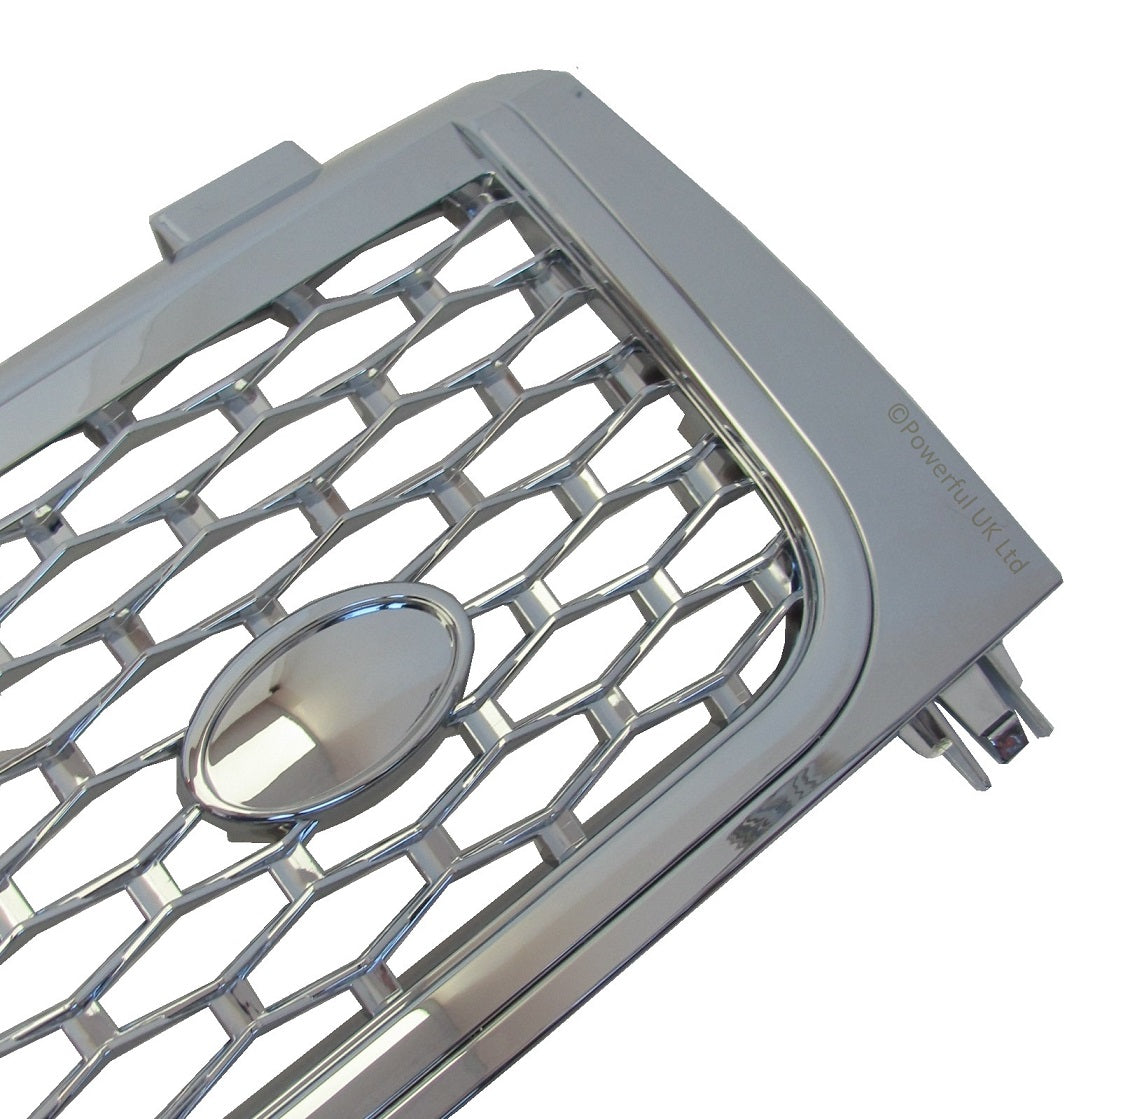 "Autobiography Style" Grille for Range Rover L322 2002-05 (with Square Headlights) - Chrome